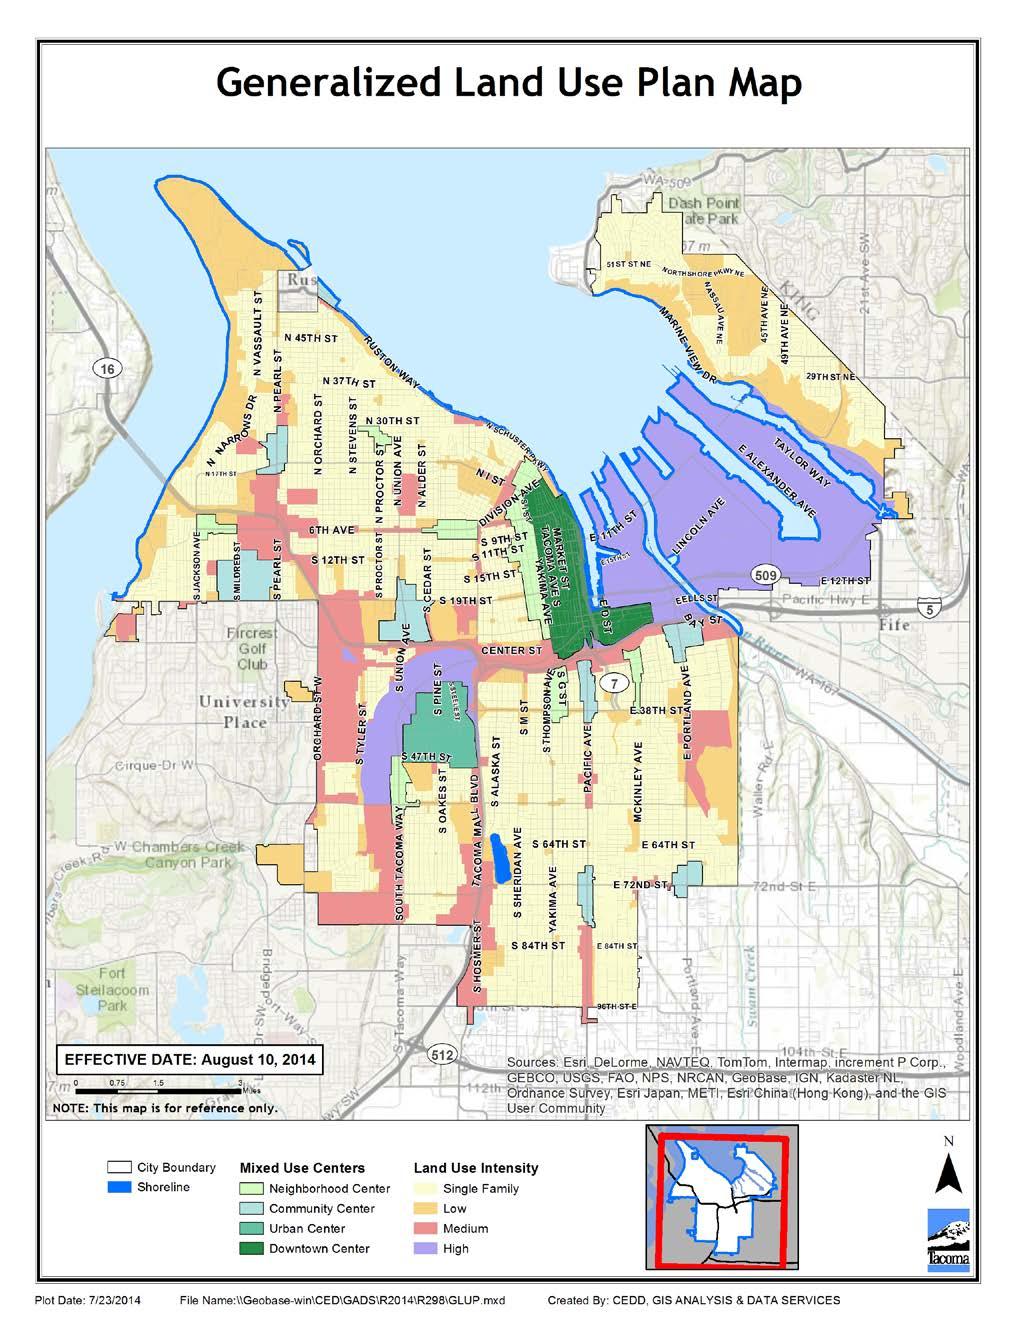 Agenda Item D-3 Attachment Growth Strategy and Development Concept Element City of Tacoma